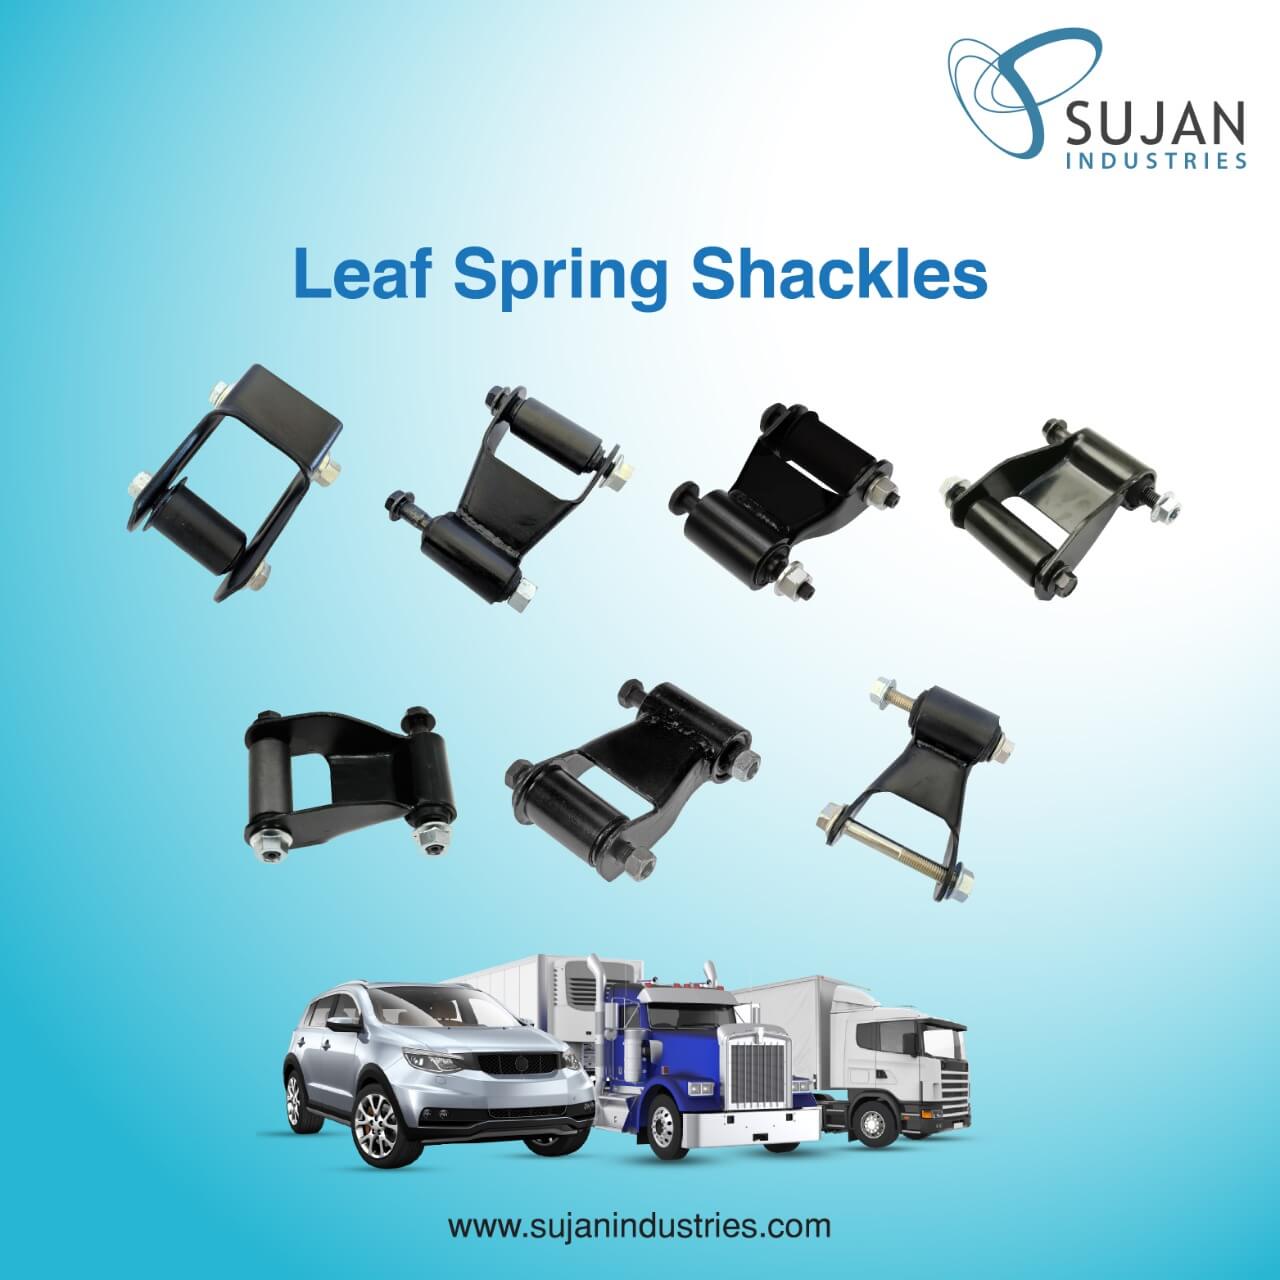 Top Quality Leaf Spring Shackles at Competitive Prices: Customized Trailer Solutions for Your Business